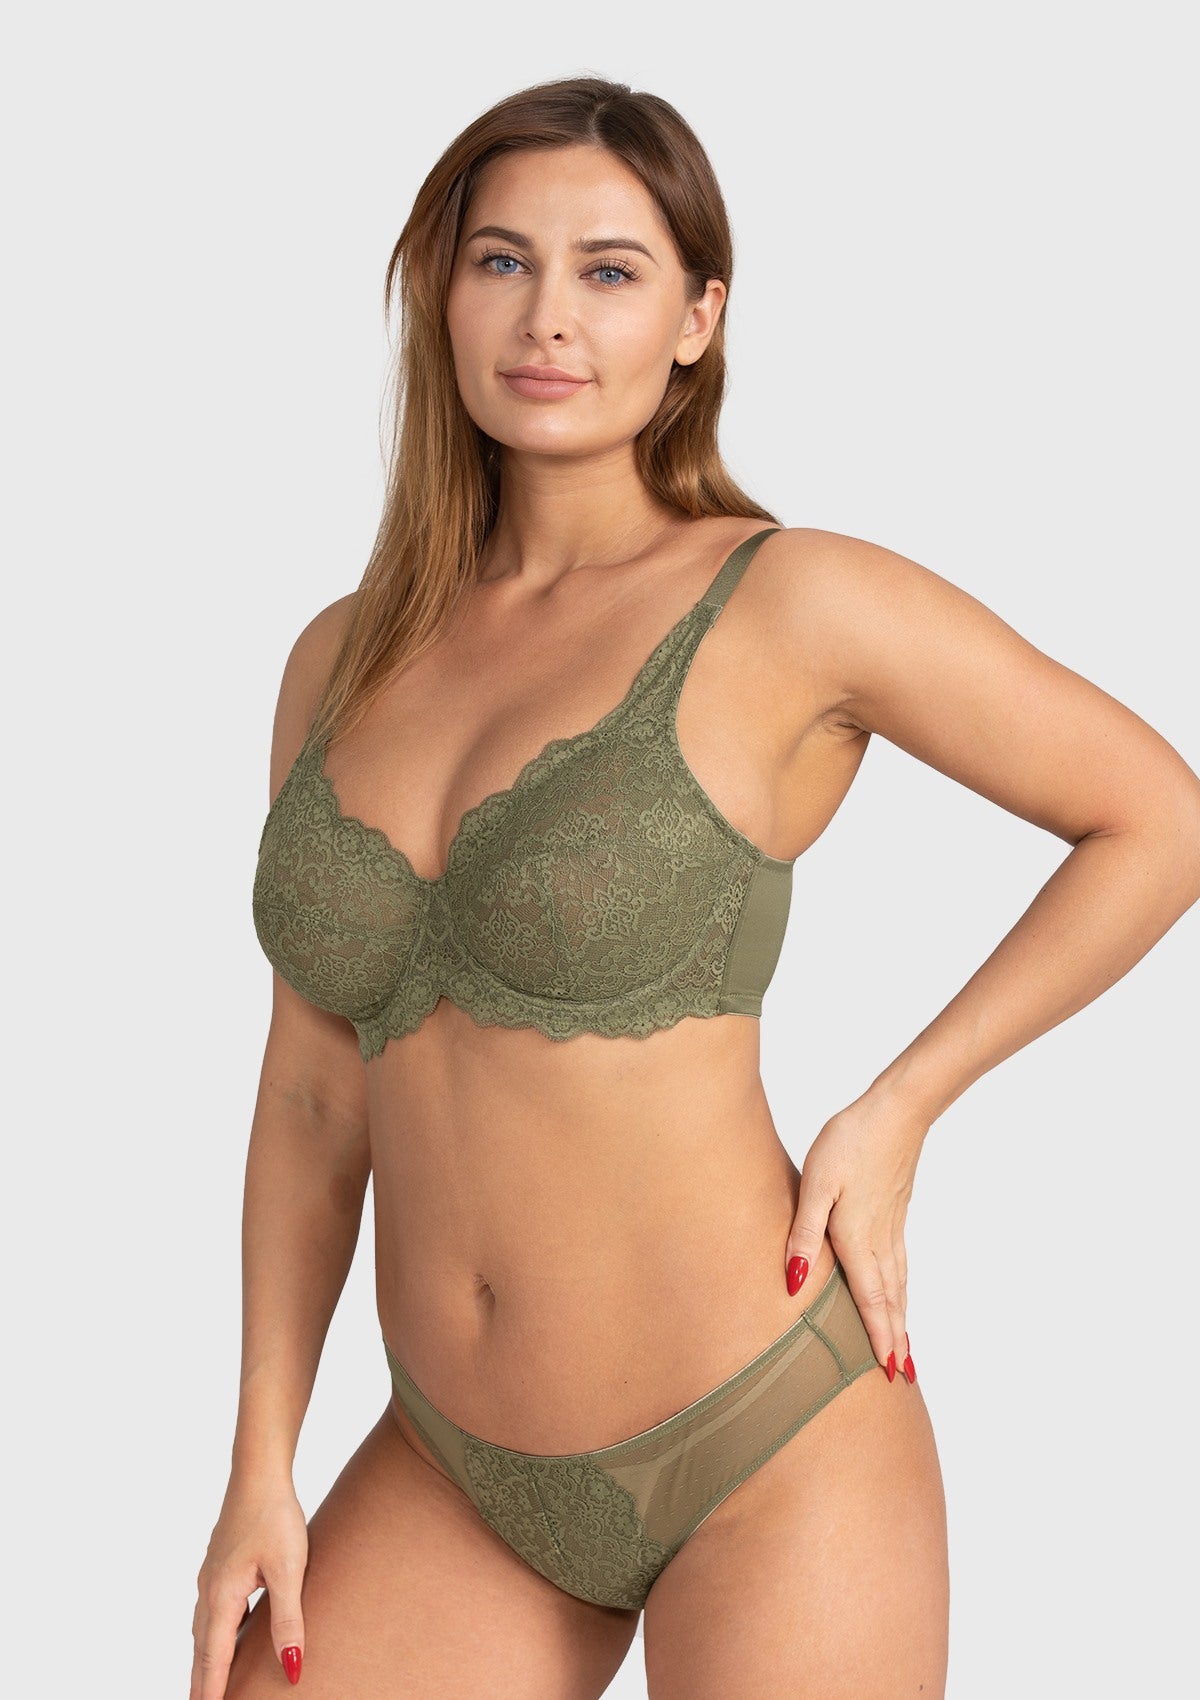 HSIA All-Over Floral Lace Unlined Bra: Minimizer Bra For Heavy Breasts - Dark Green / 42 / C